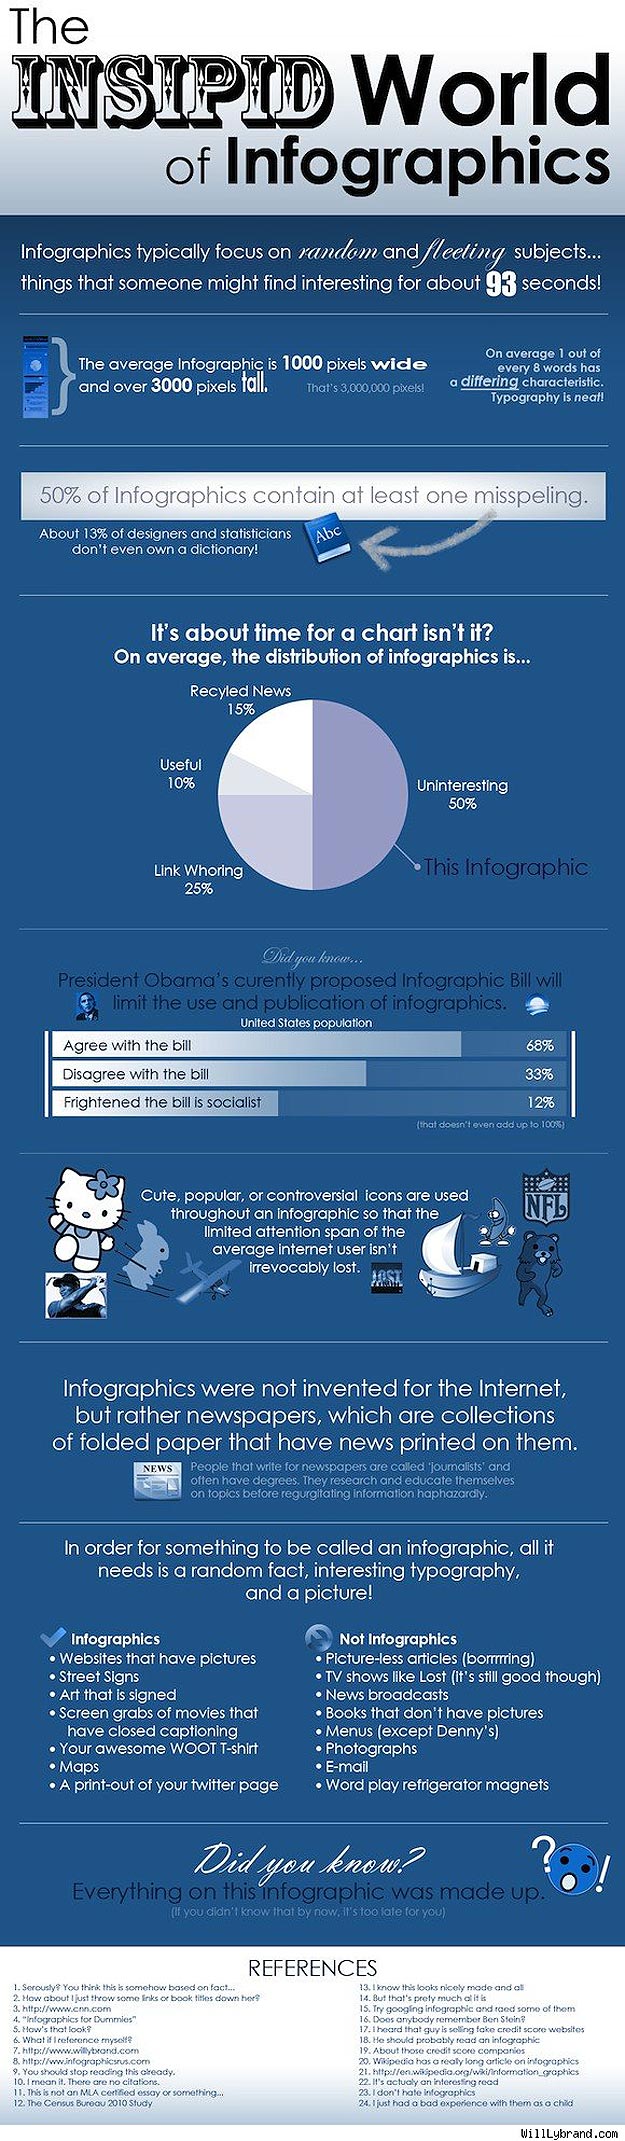 Funkadelic Facts About Infographics